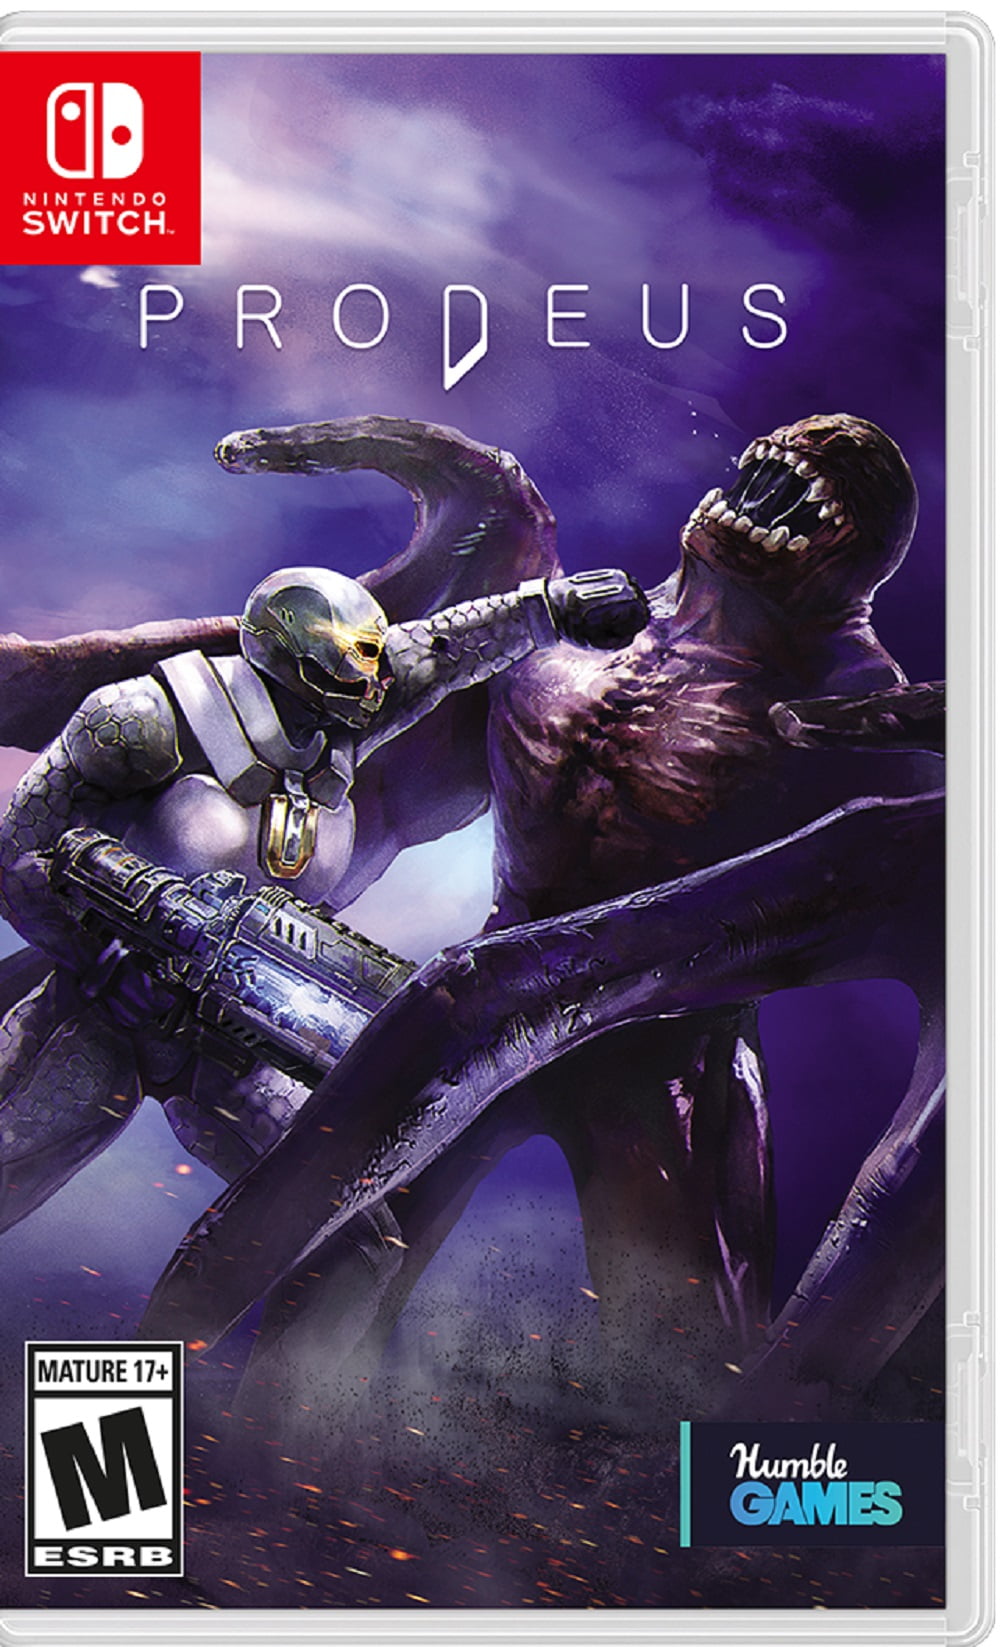 Prodeus, Nintendo Switch, Humble Games, 812303019111, Physical Edition